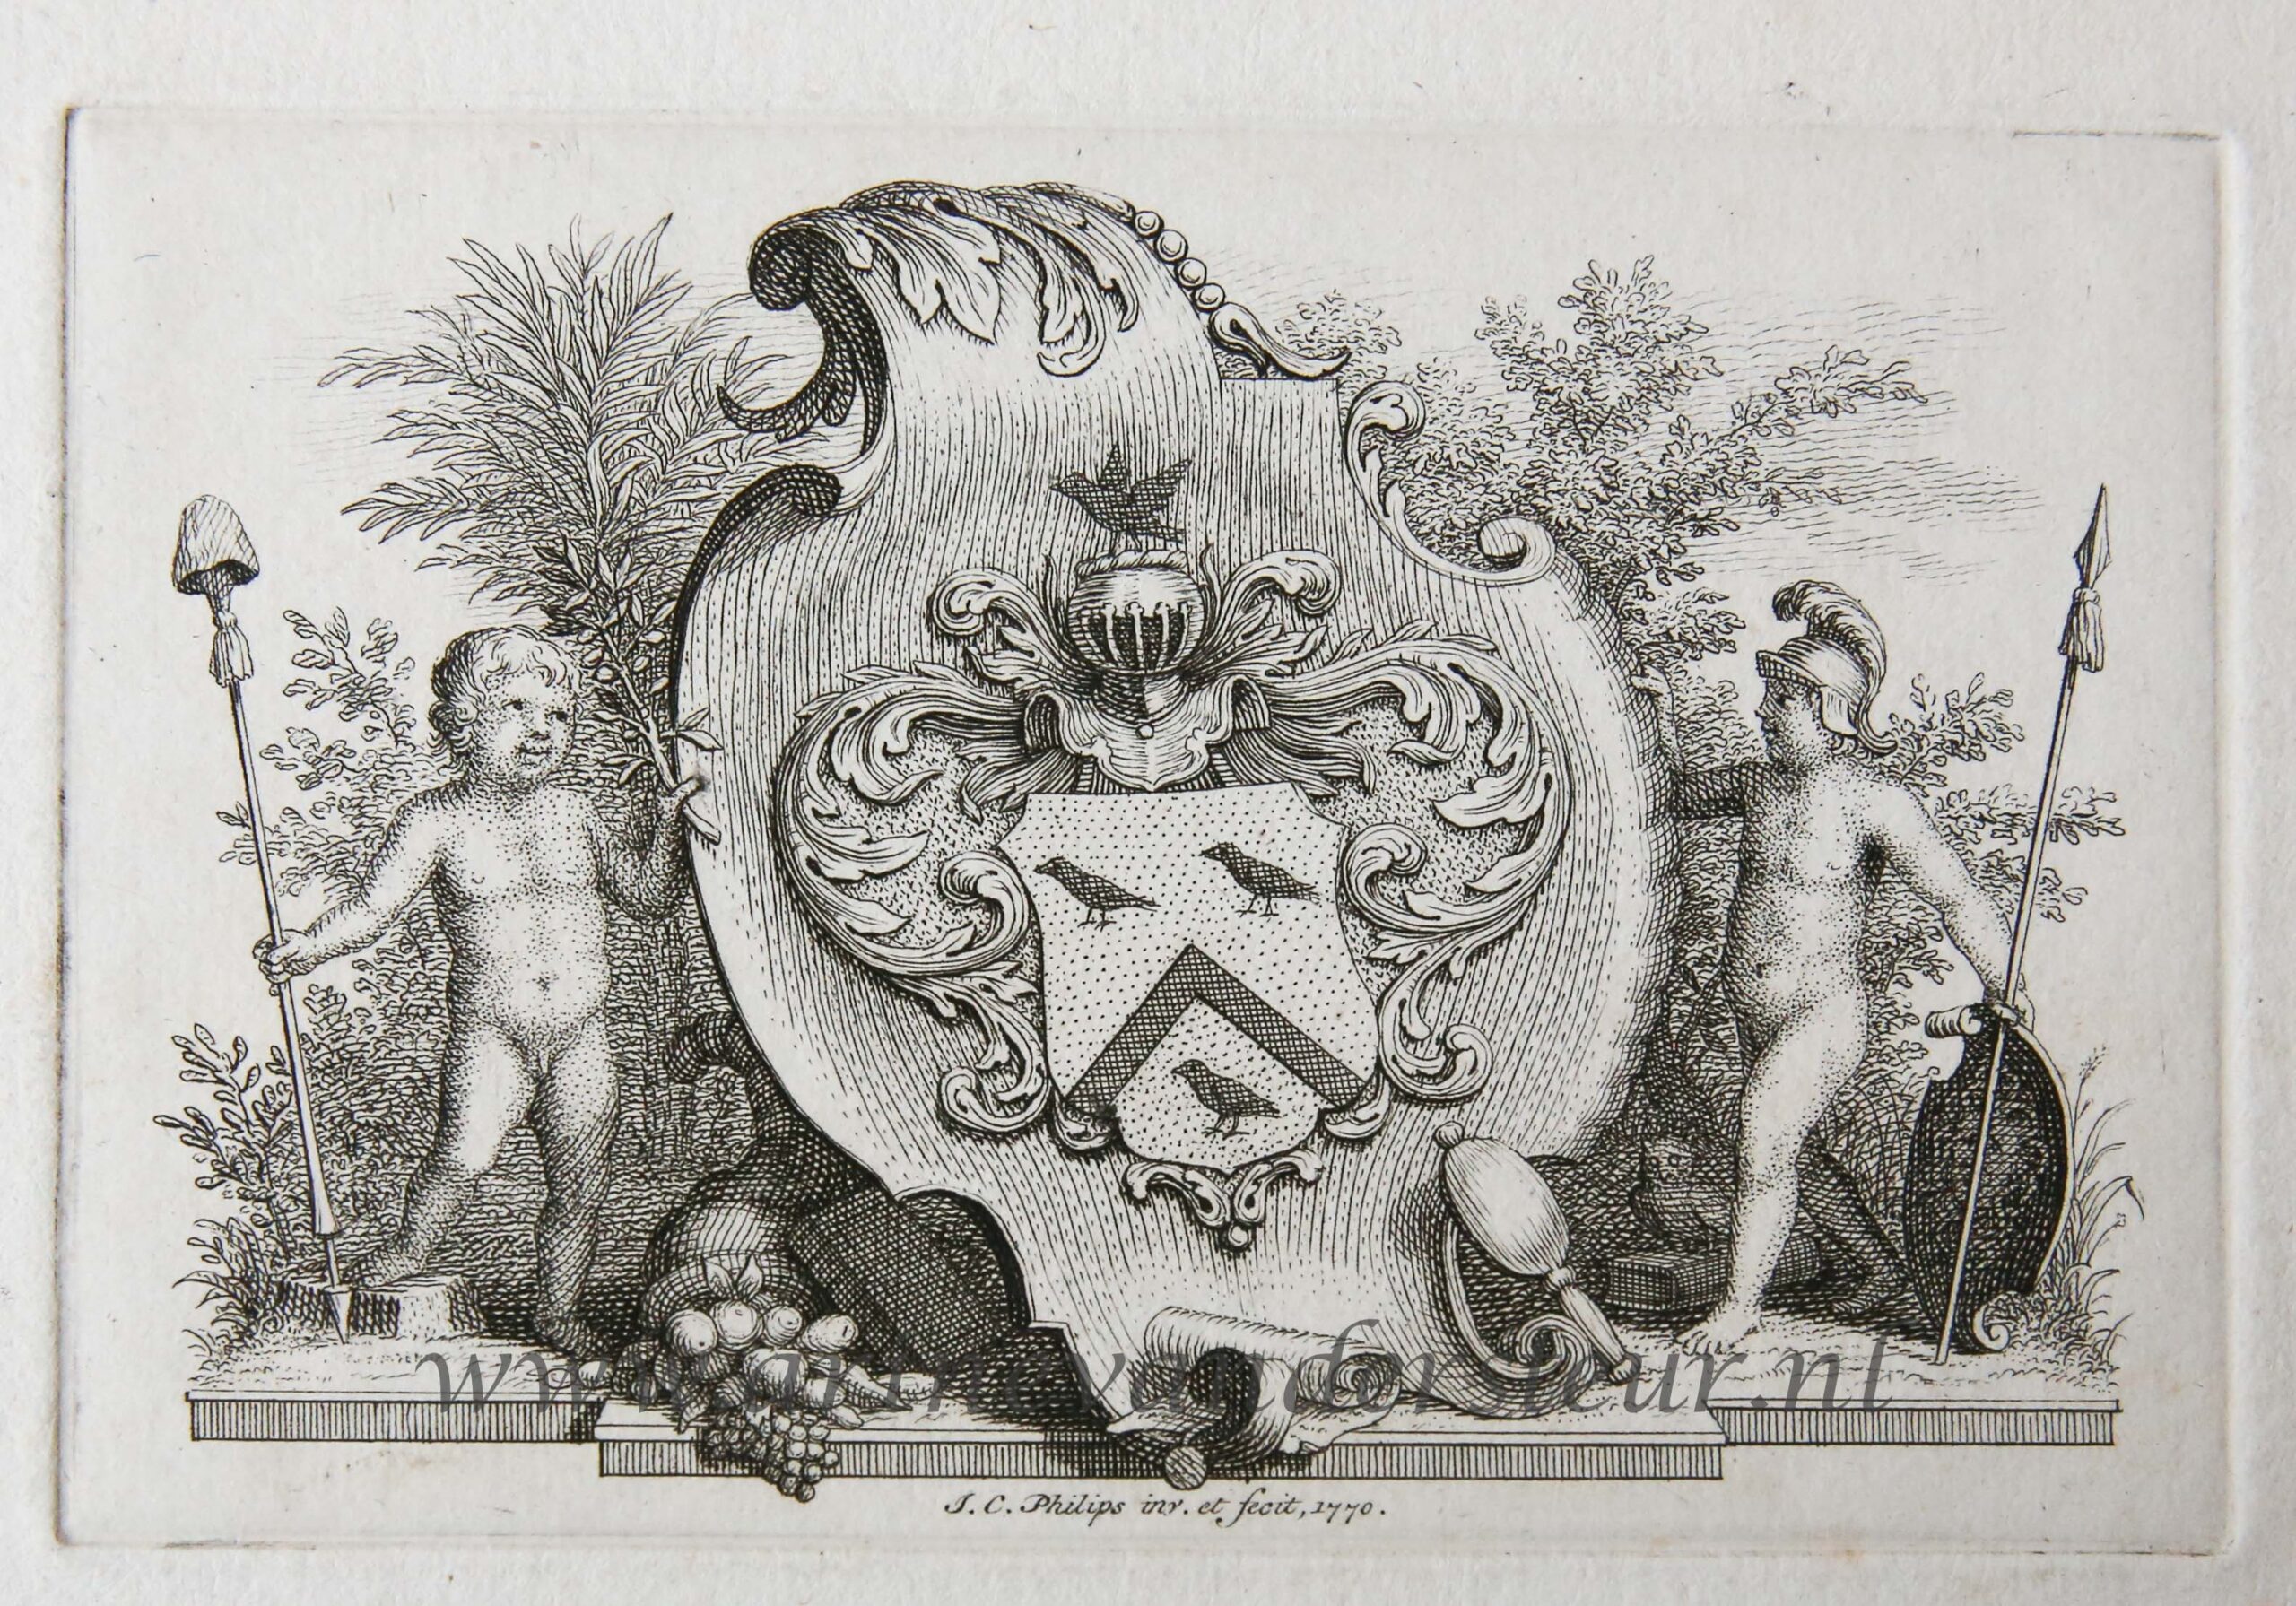 [Heraldic vignette, 1770] Vignette with a family coat of arms, published 1770, 1 p.